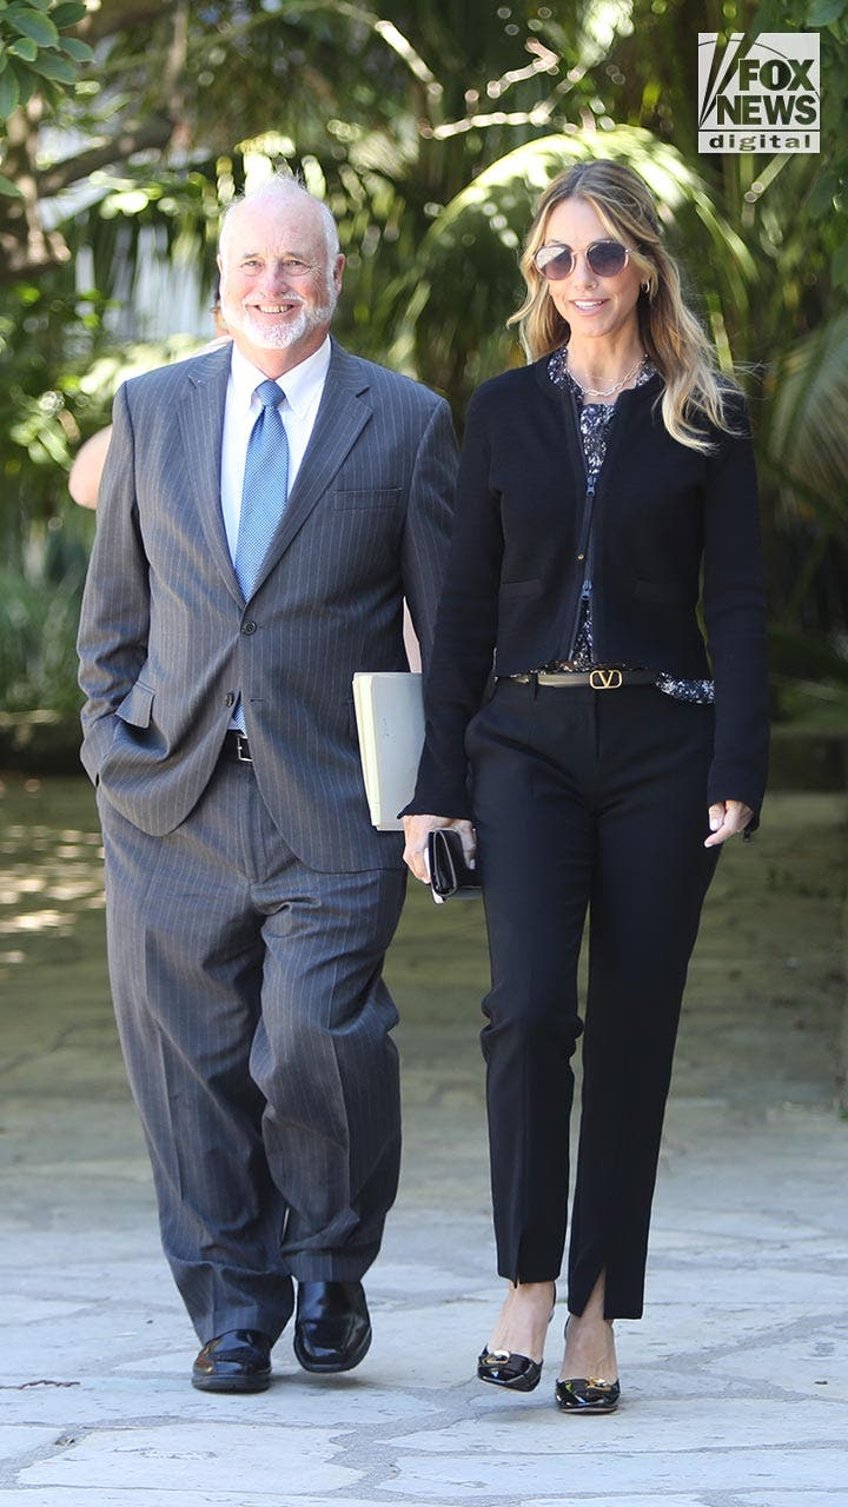 kevin costners divorce battle amid ironclad prenup why celeb premarital agreements are contested